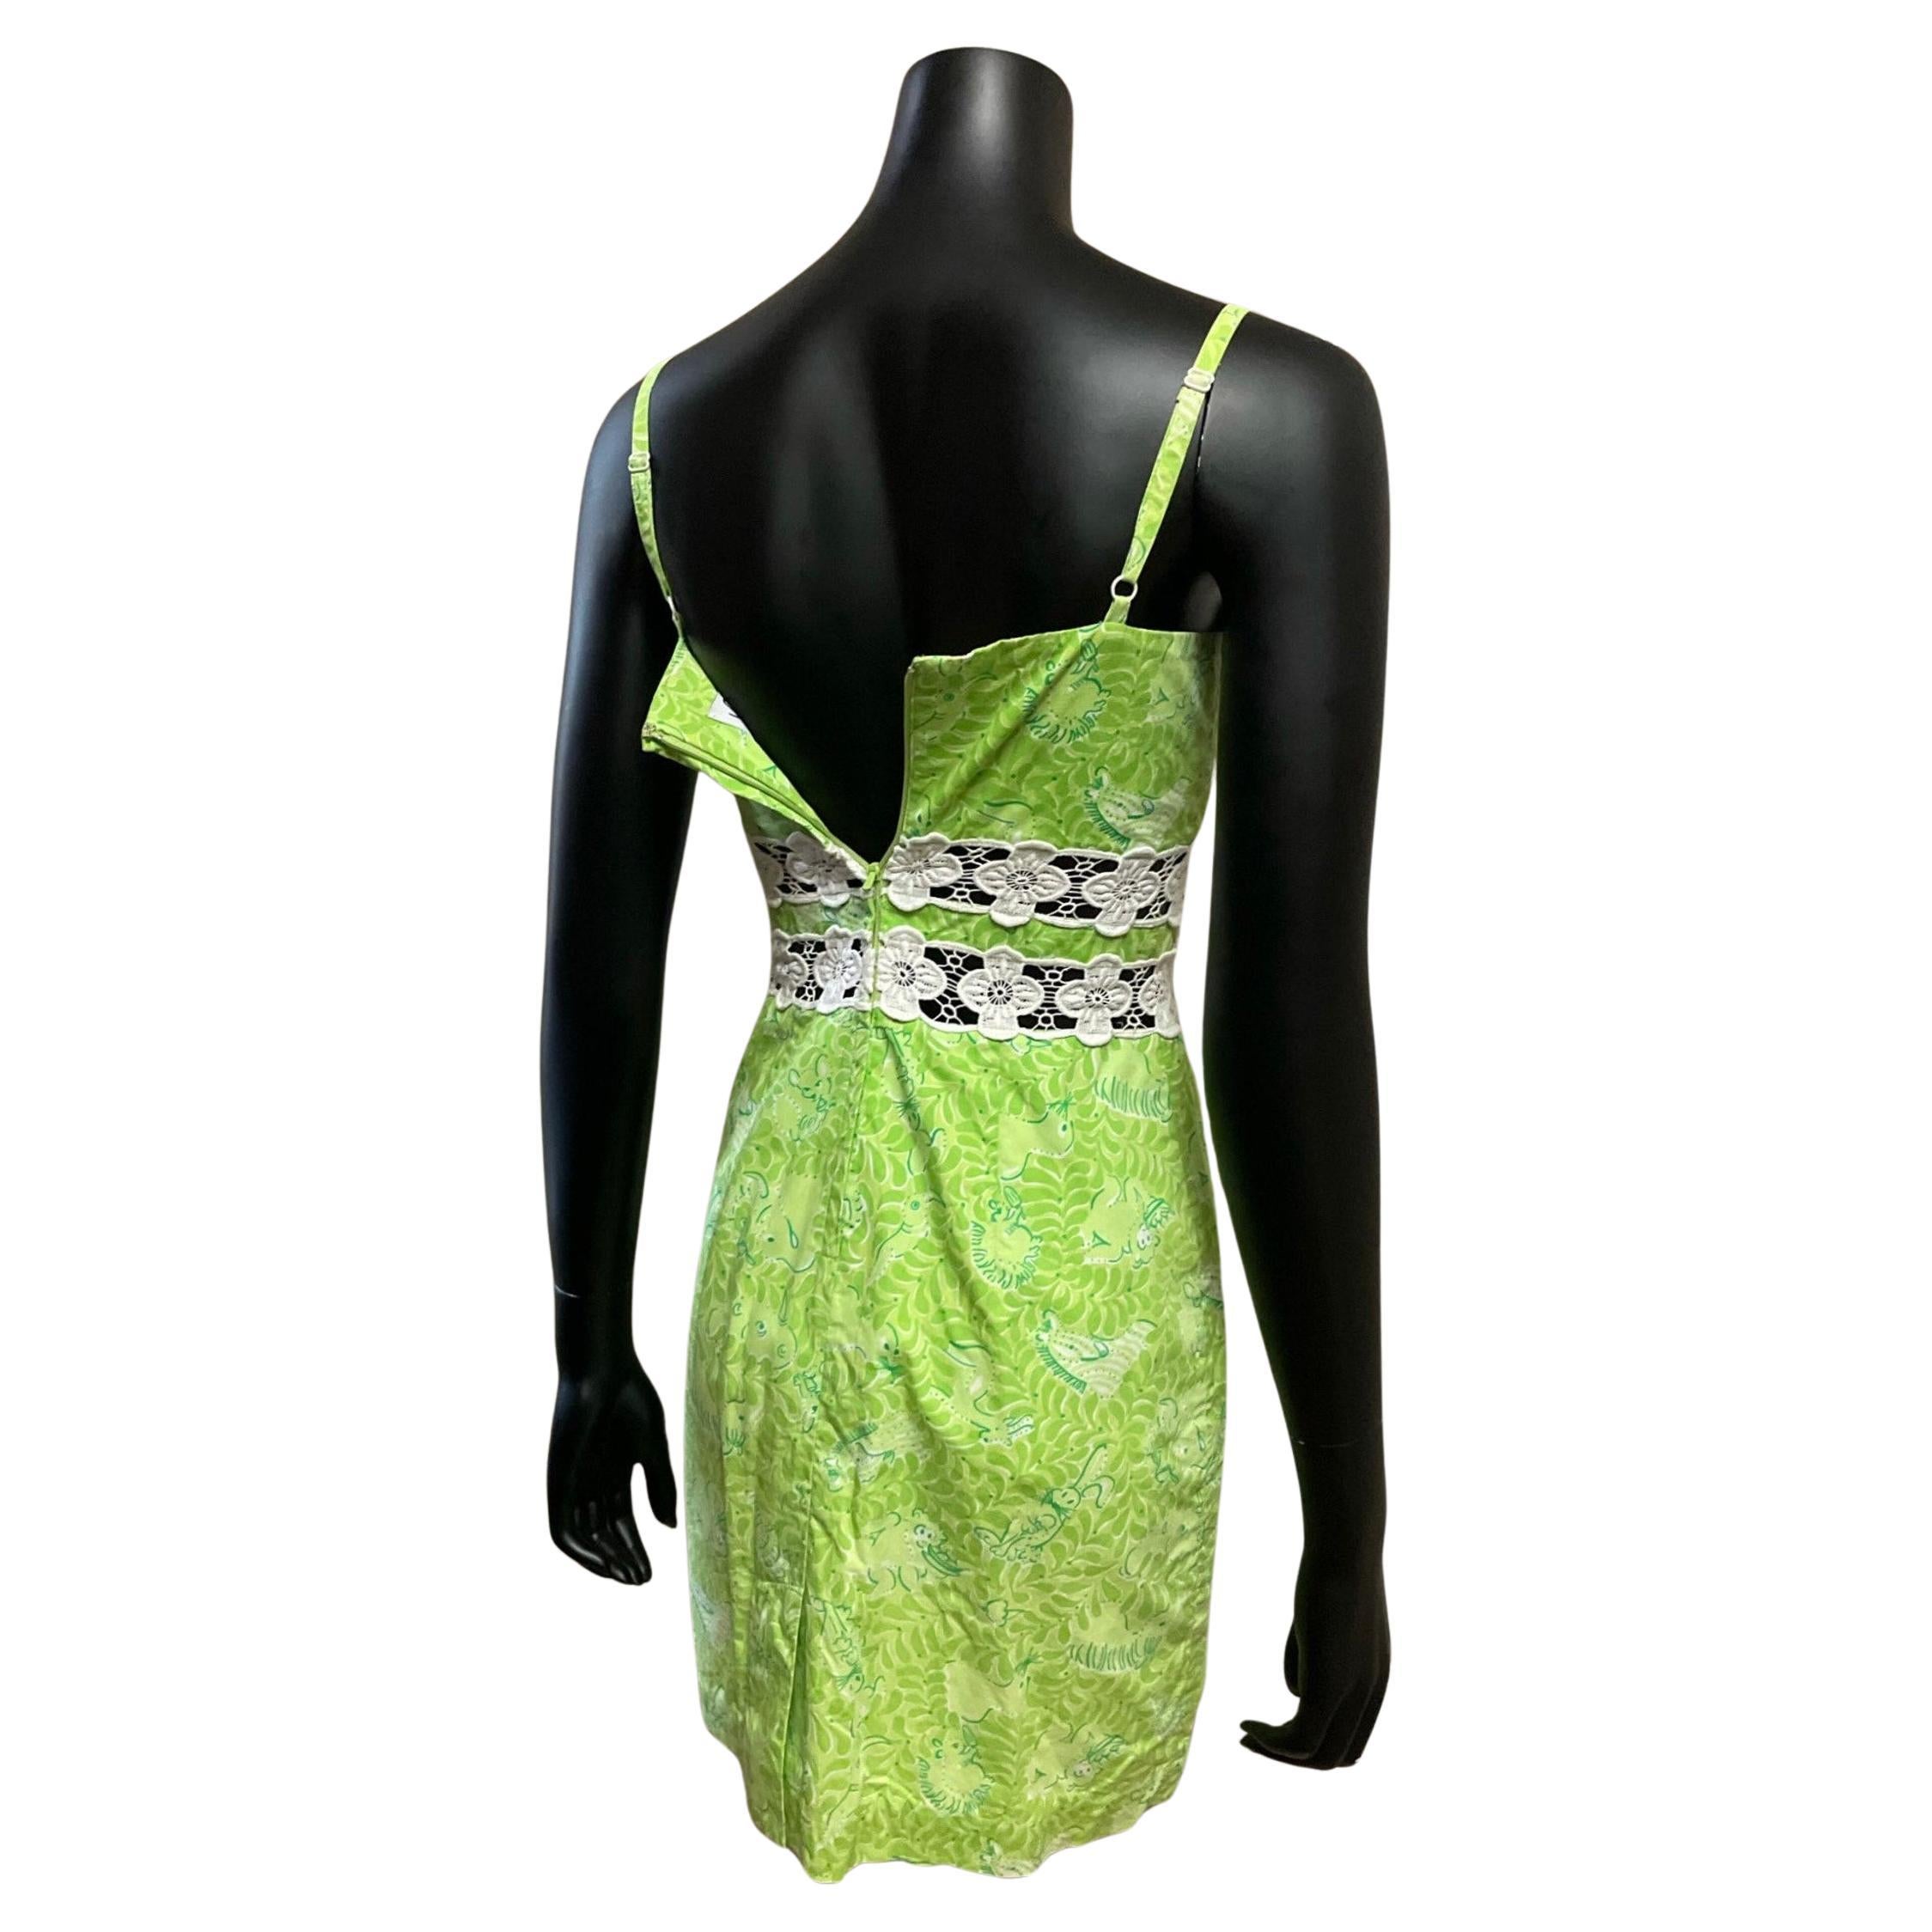 Lilly Pulitzer Lime Green Mini Dress, Circa 1990s For Sale 3